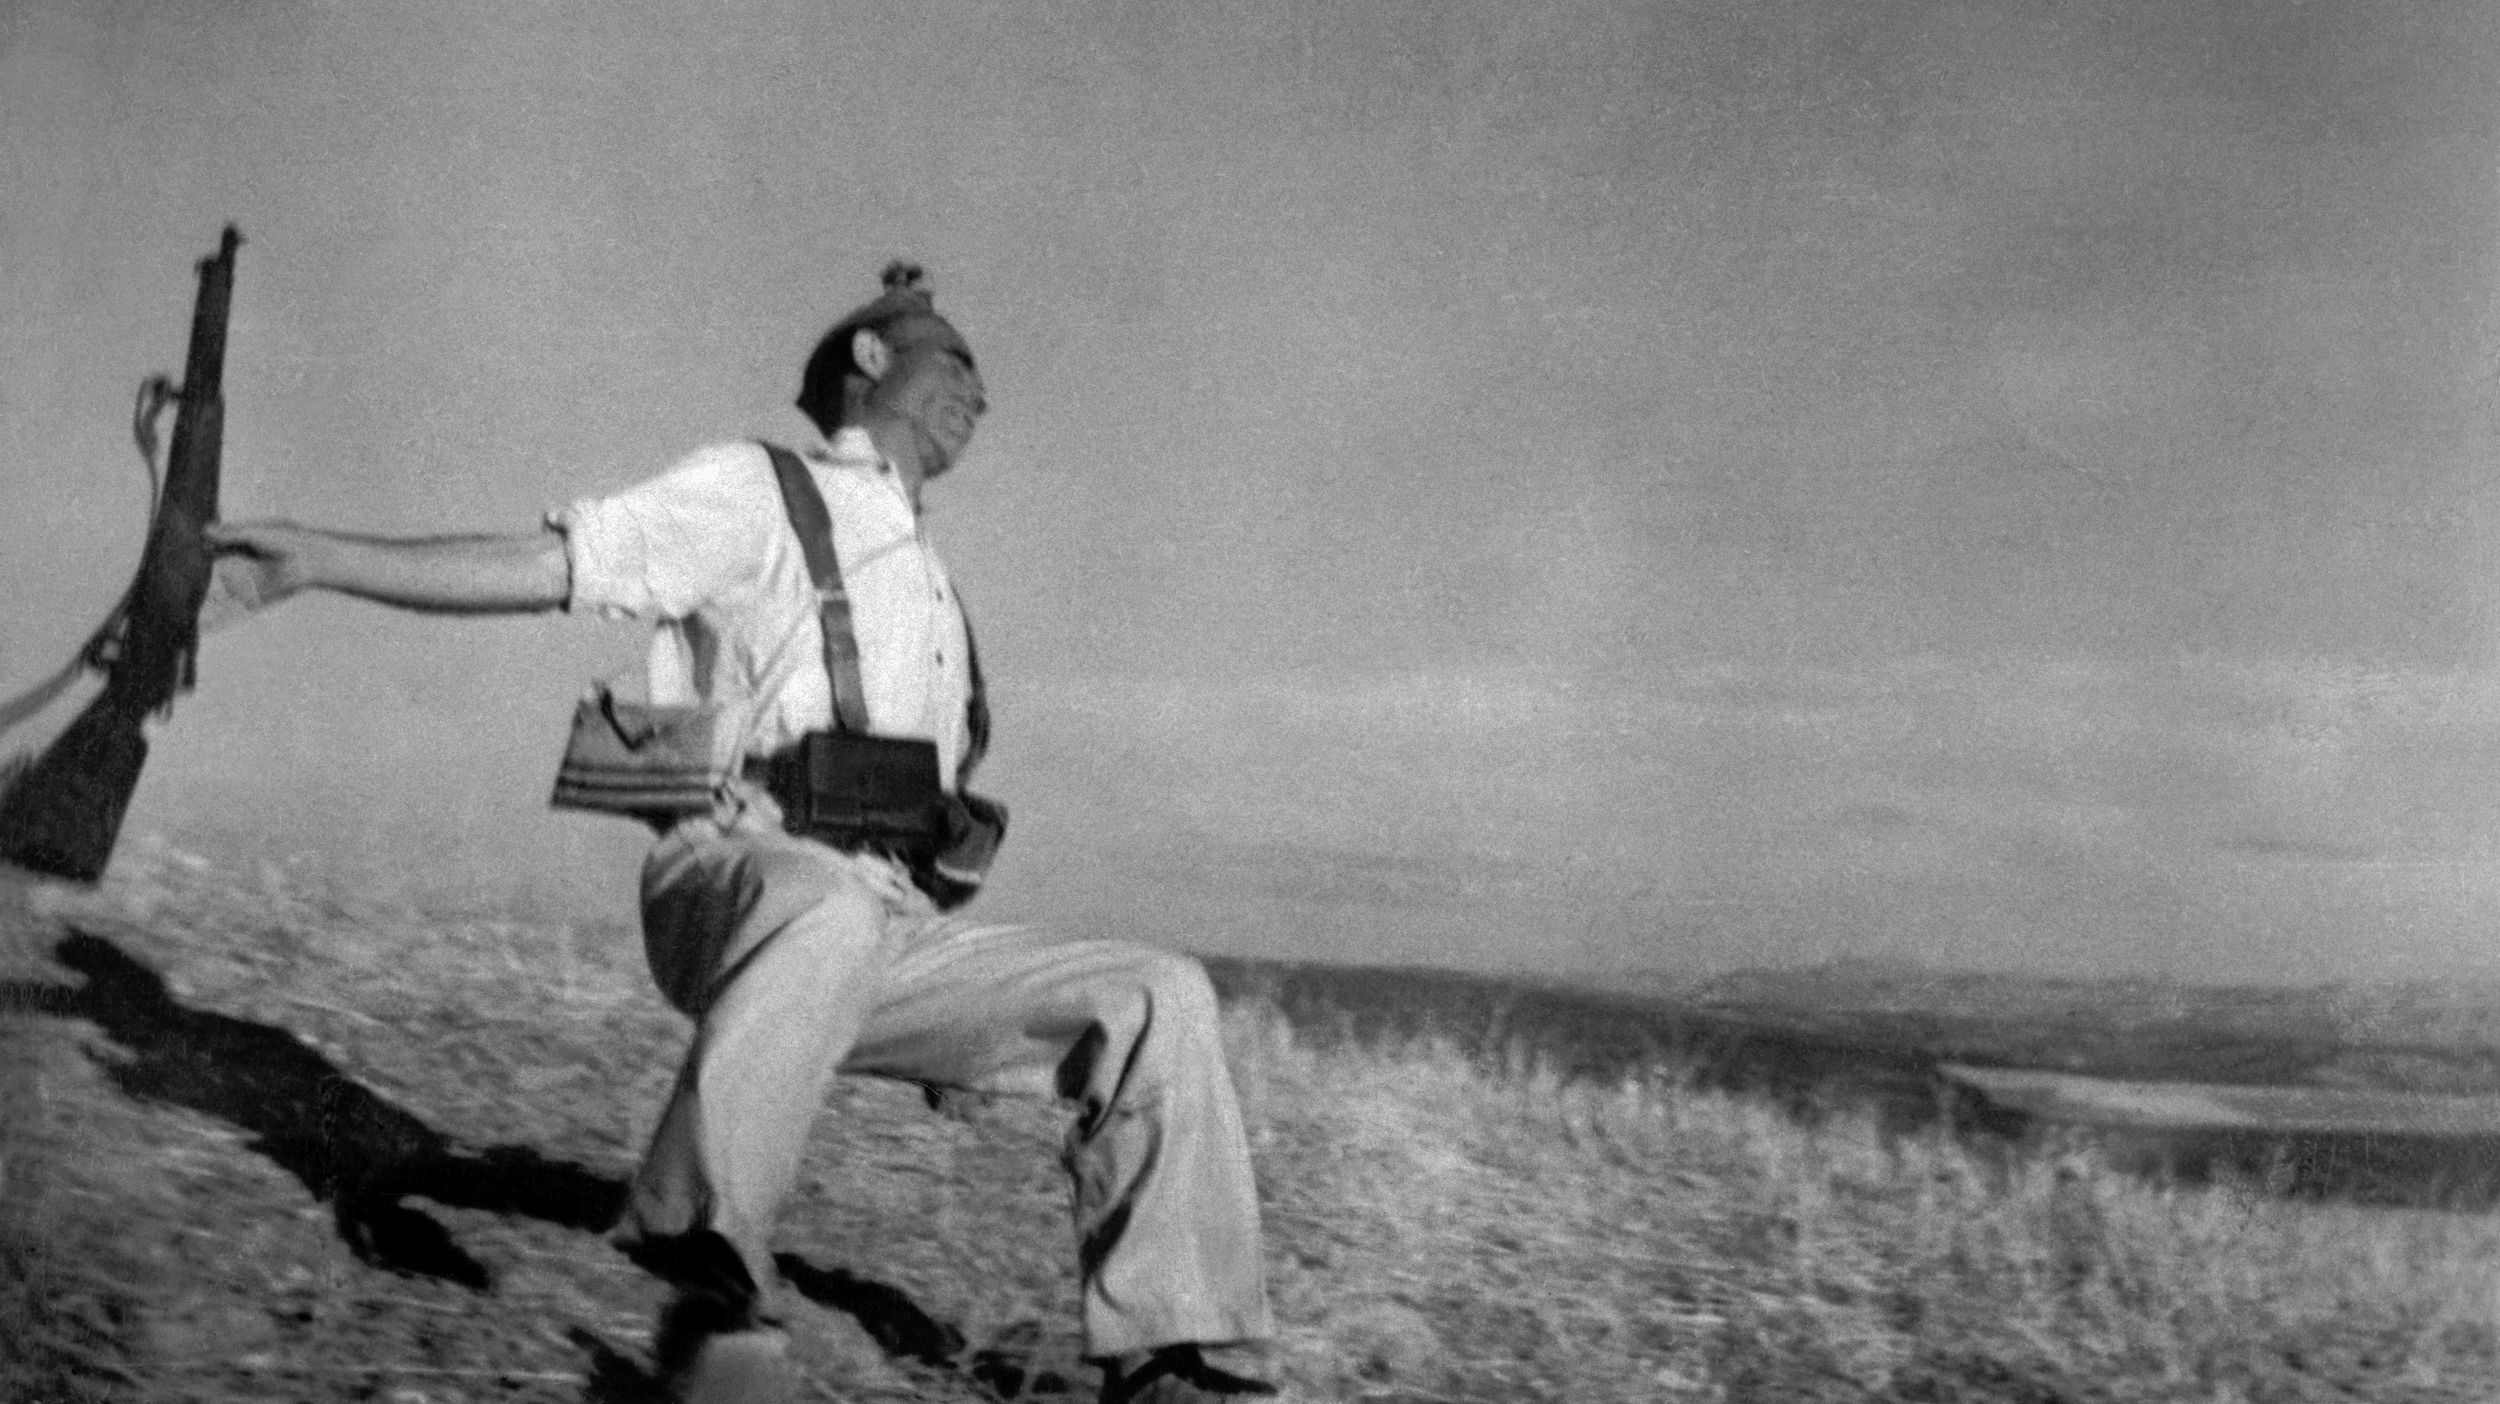 Spanish loyalist Federico Borrell Garcia is captured at the moment of his death at Cerro Muriano by photographer Robert Capa on September 5, 1936. Capa’s Falling Soldier remains the most controversial war photo in history.